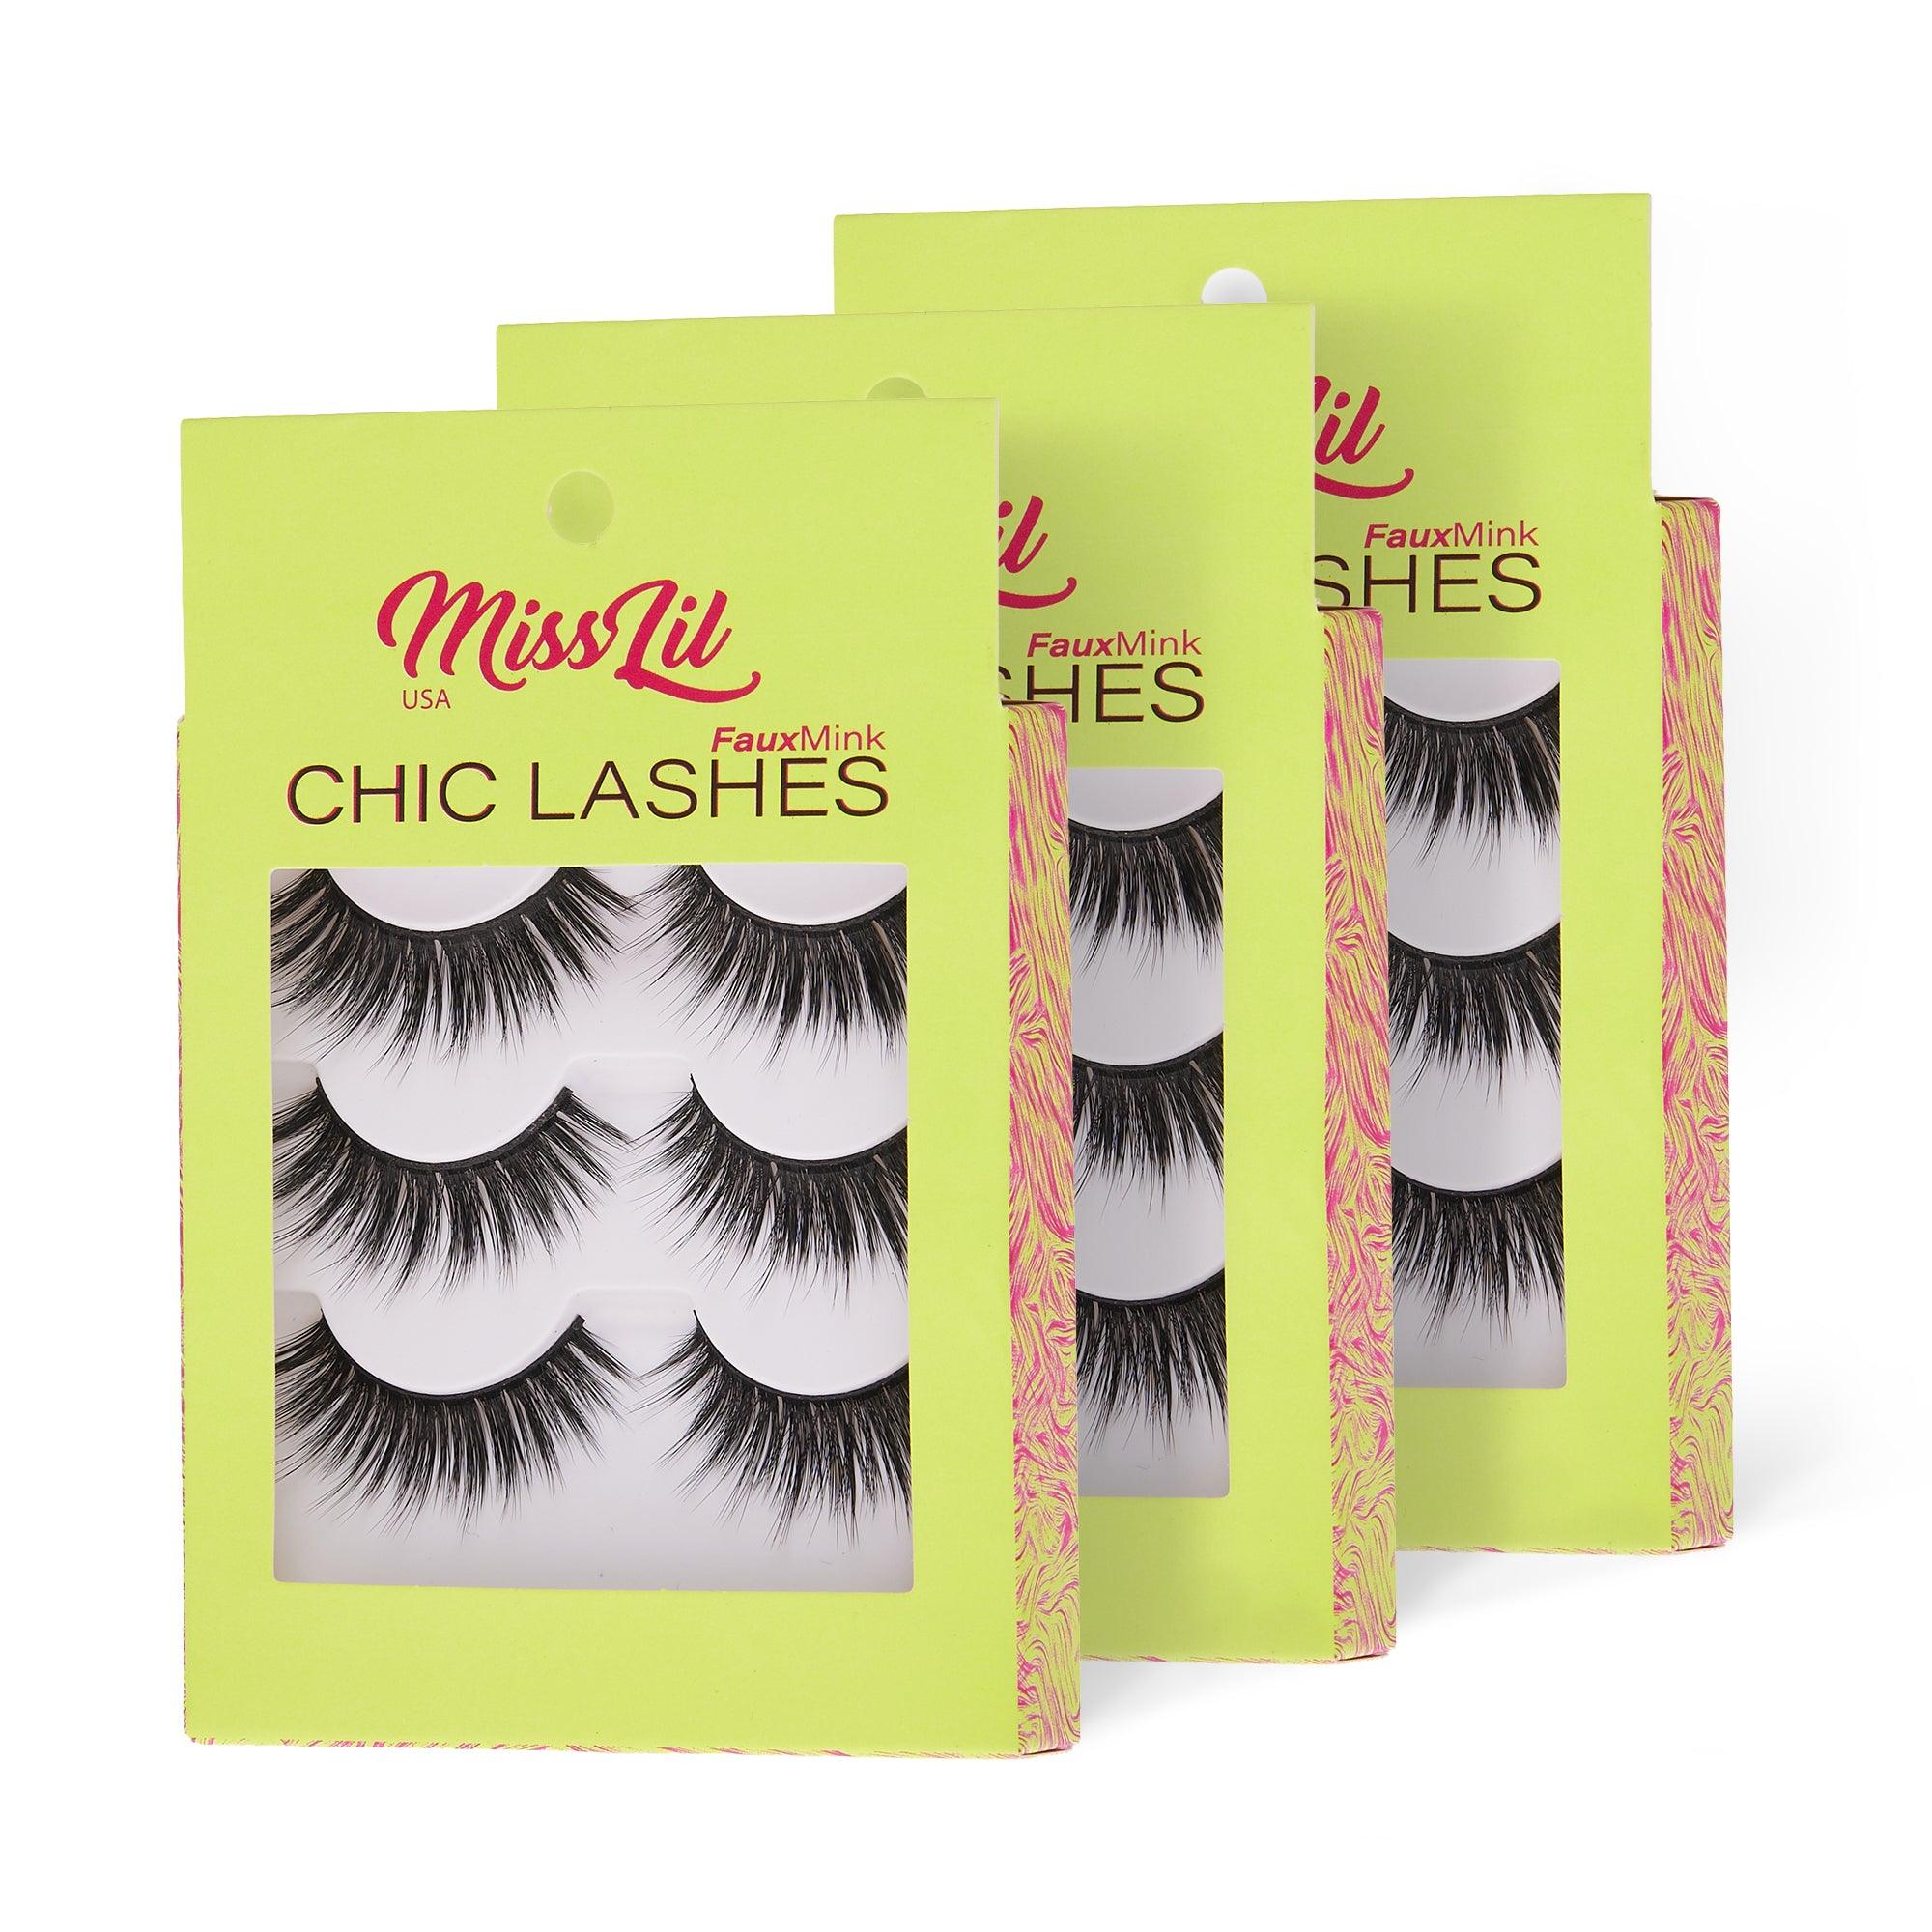 3-Pair Faux Mink Eyelashes - Chic Lashes Collection #1 - Pack of 3 - Miss Lil USA